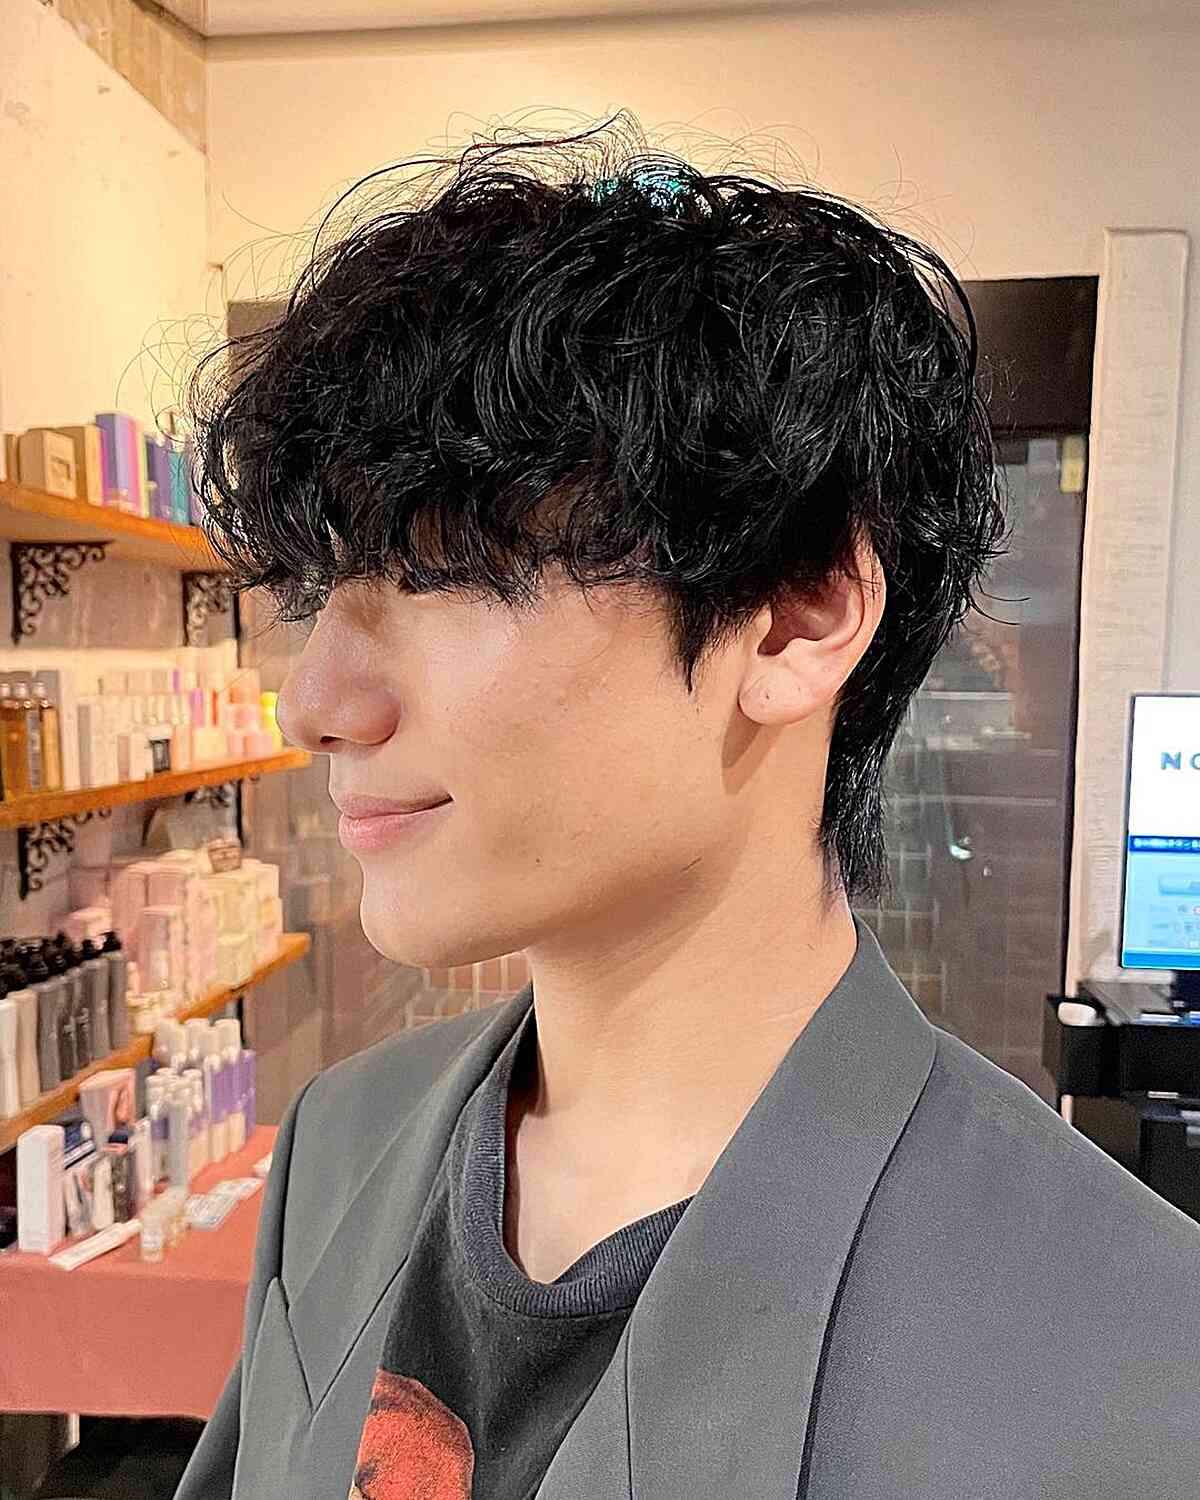 Kpop Messy Waves with Fringe on Asian Guys